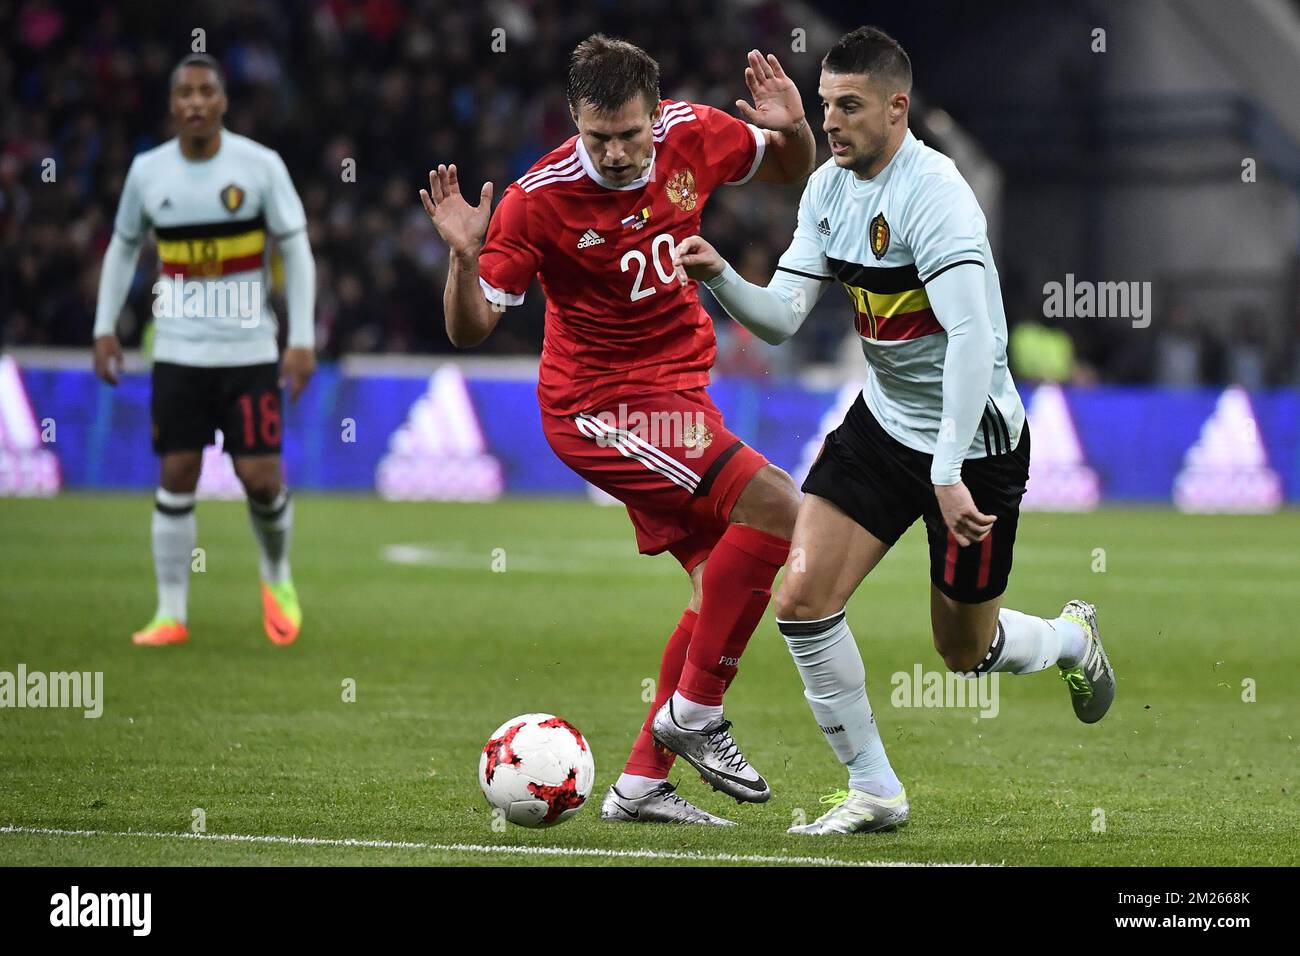 Russia's Maksim Kanunnikov and Belgium's Kevin Mirallas fight for the ball during a friendly game between Belgium's Red Devils and Russia, on Tuesday 28 March 2017, in Adler, Russia. BELGA PHOTO DIRK WAEM Stock Photo